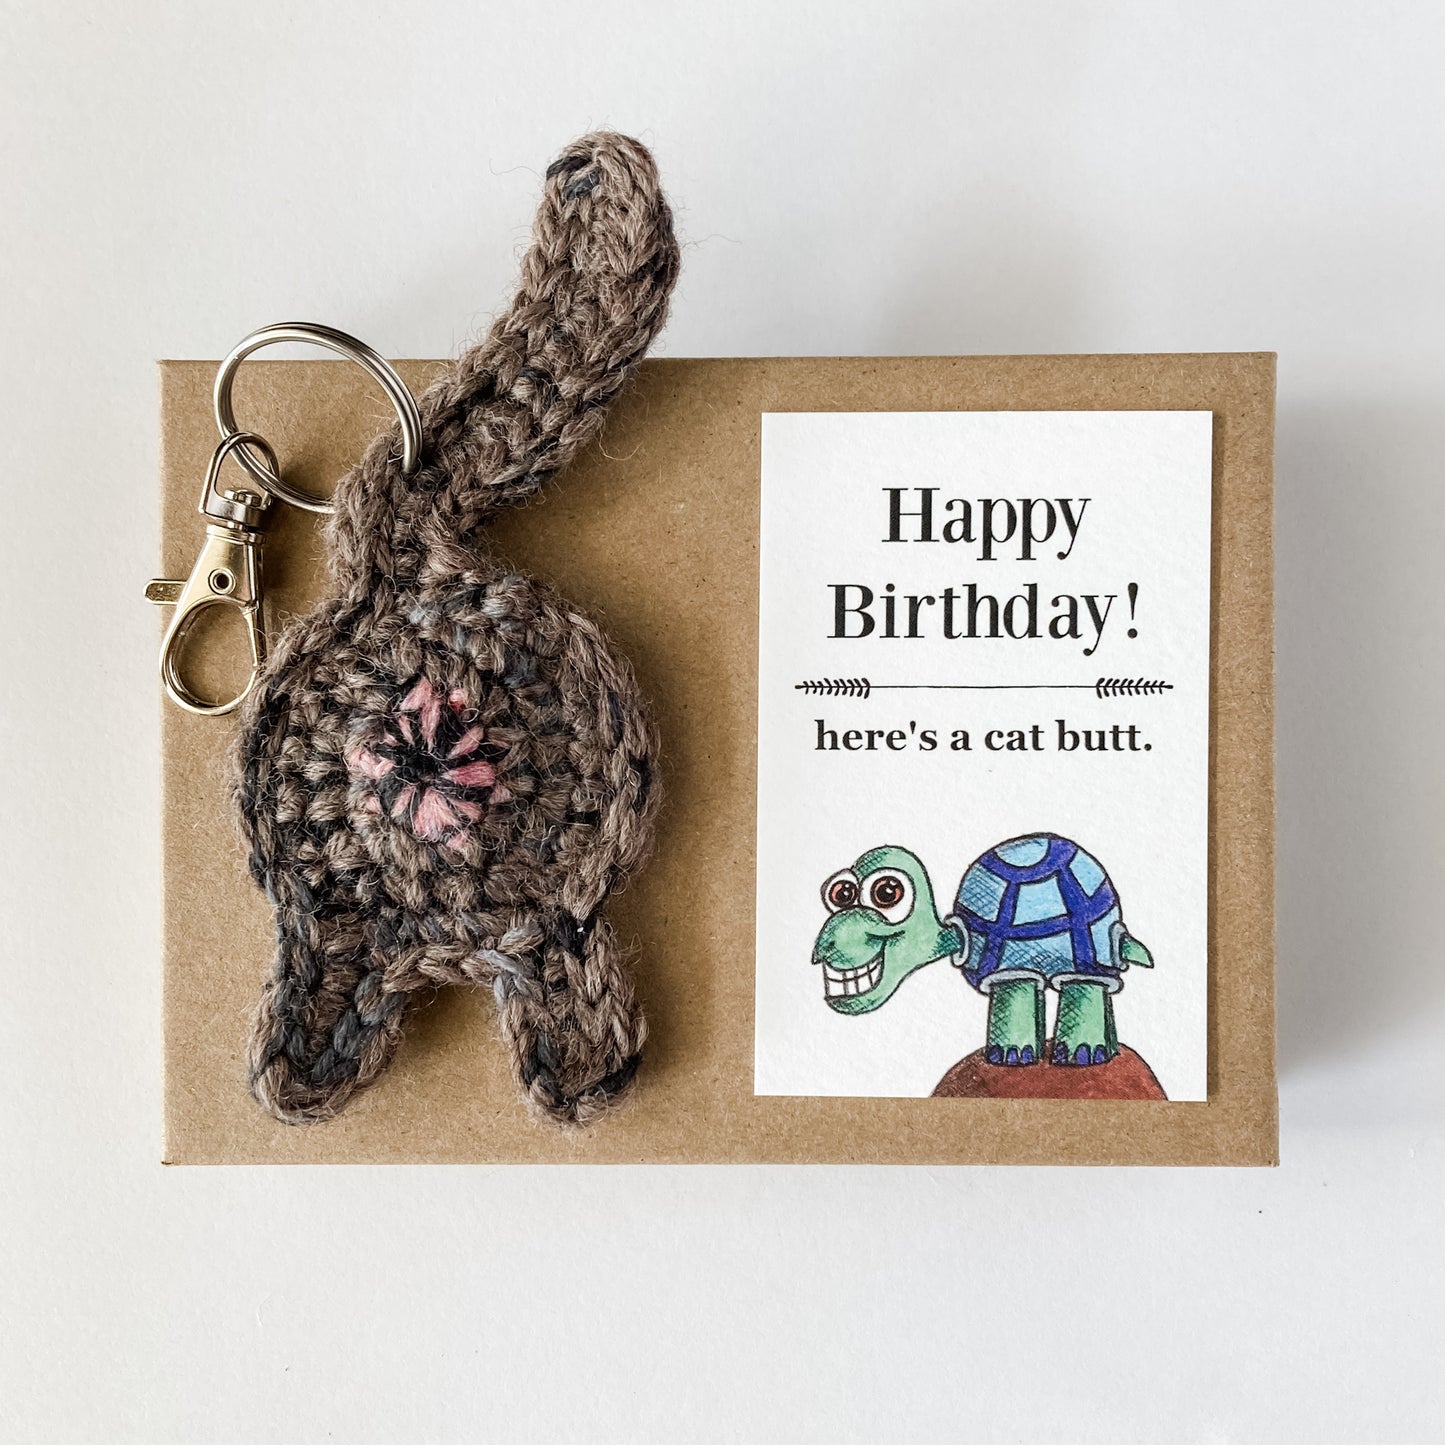 Torti Calico Cat Butt Keychain Funny Birthday Gift with Novelty Card